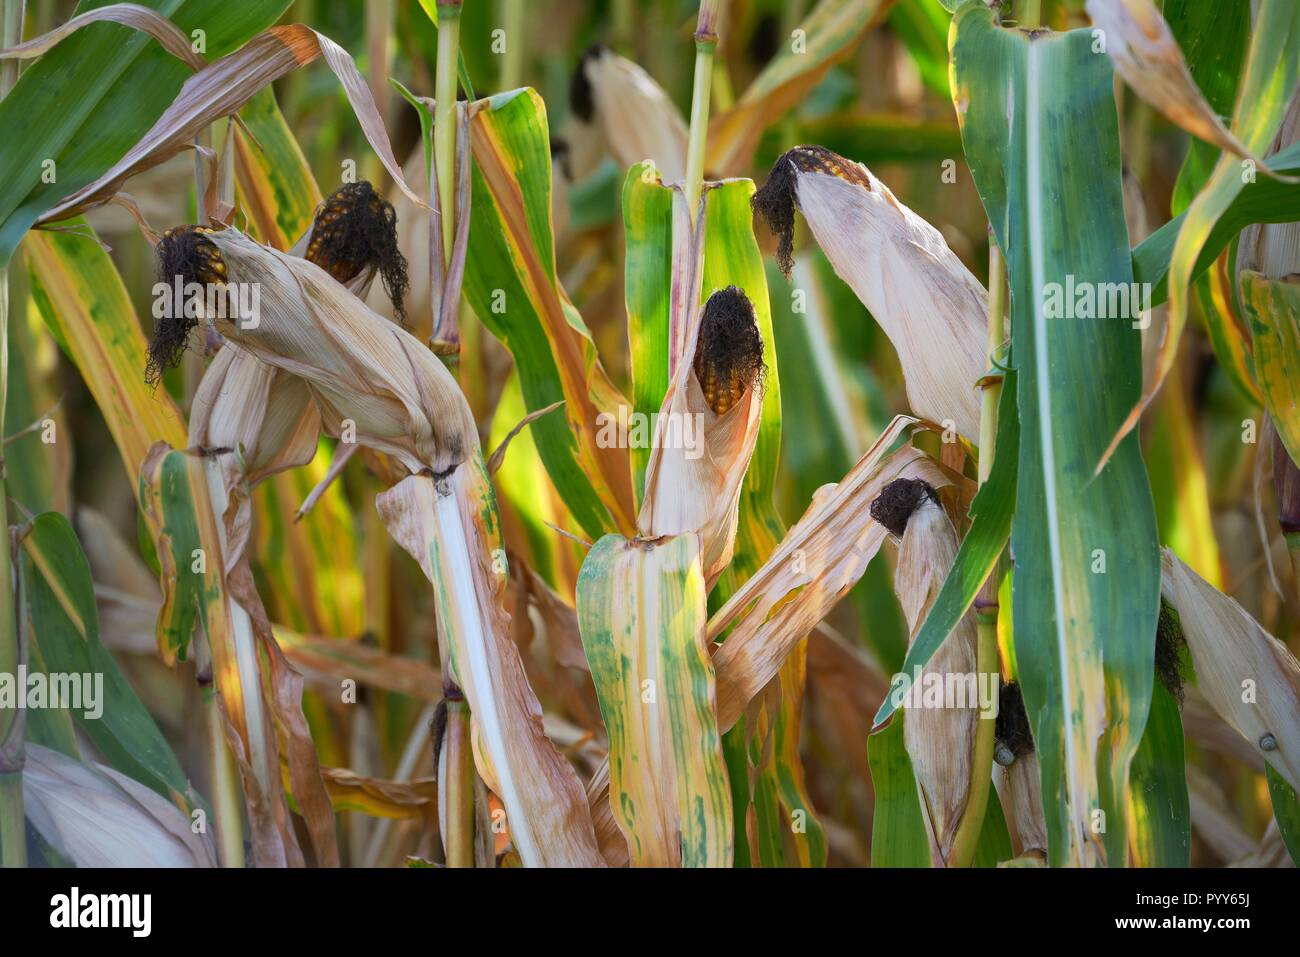 Ripe corn on the cob maize plant field crop ready for harvest. Brittany, Normandy France Stock Photo